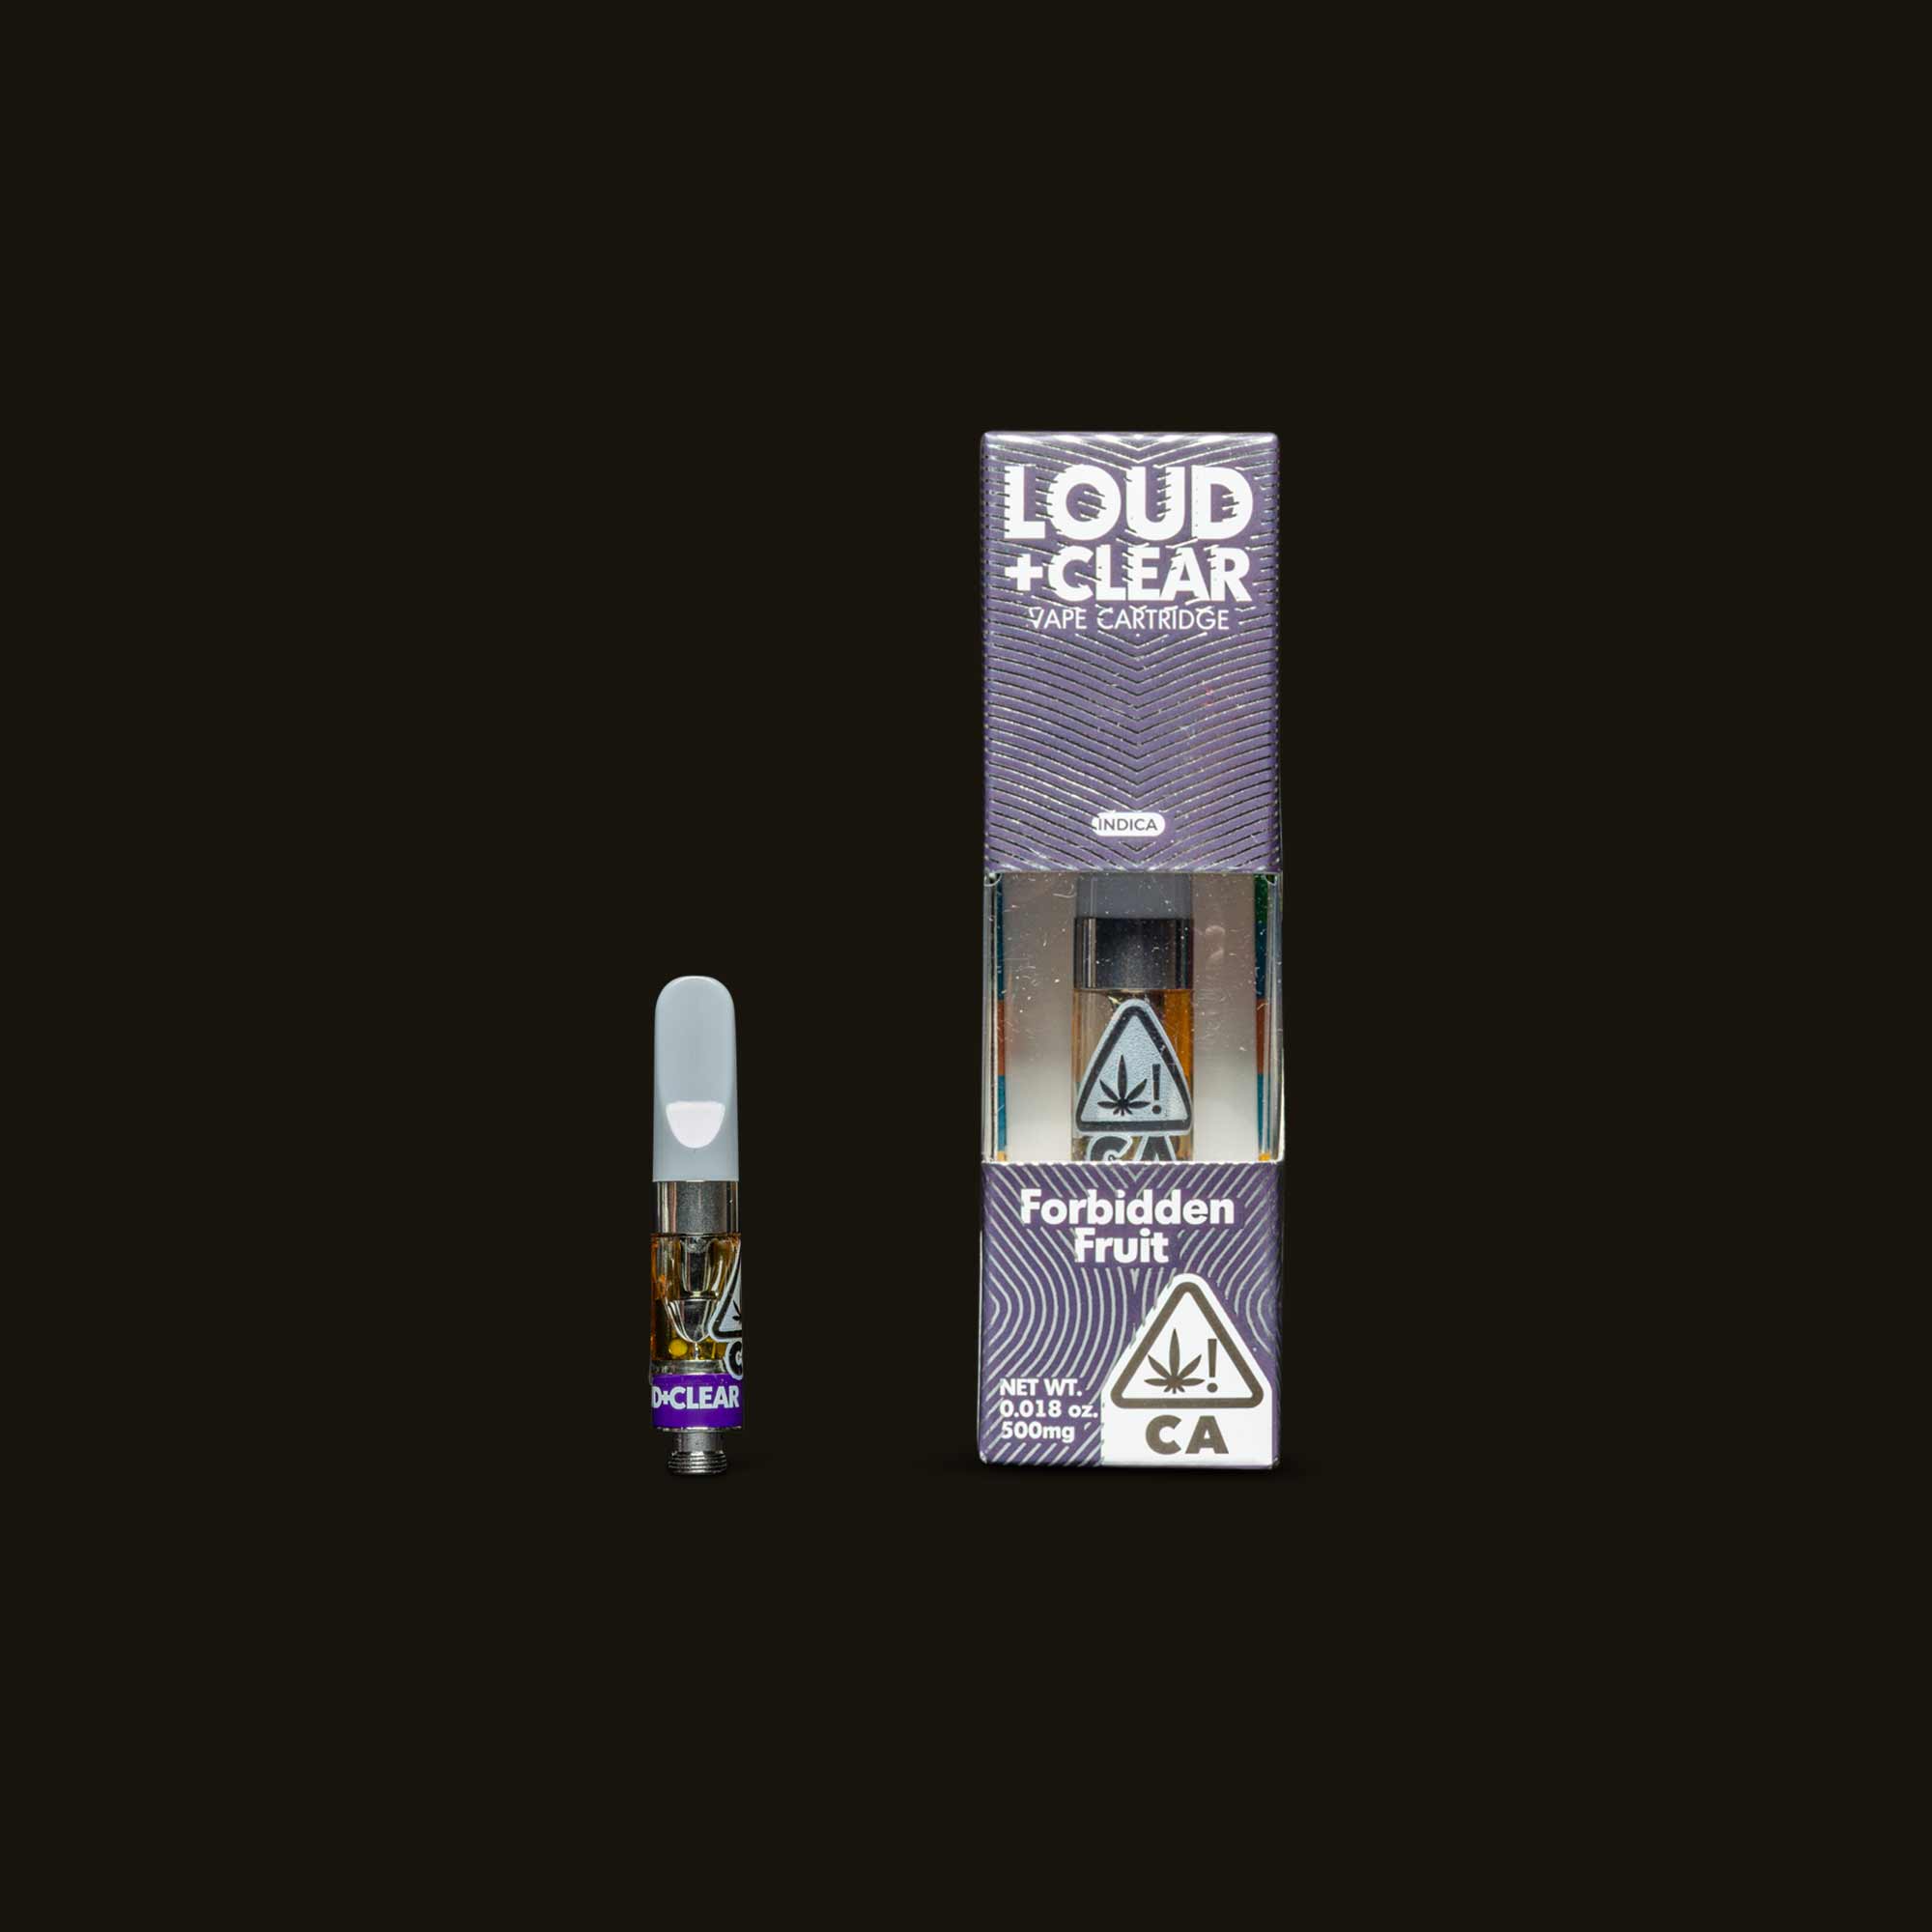 ABSOLUTEXTRACTS-FORBIDDENFRUIT-LOUDCLEAR-PREROLLS-CA-FRONT-PRODUCTS-4-671530